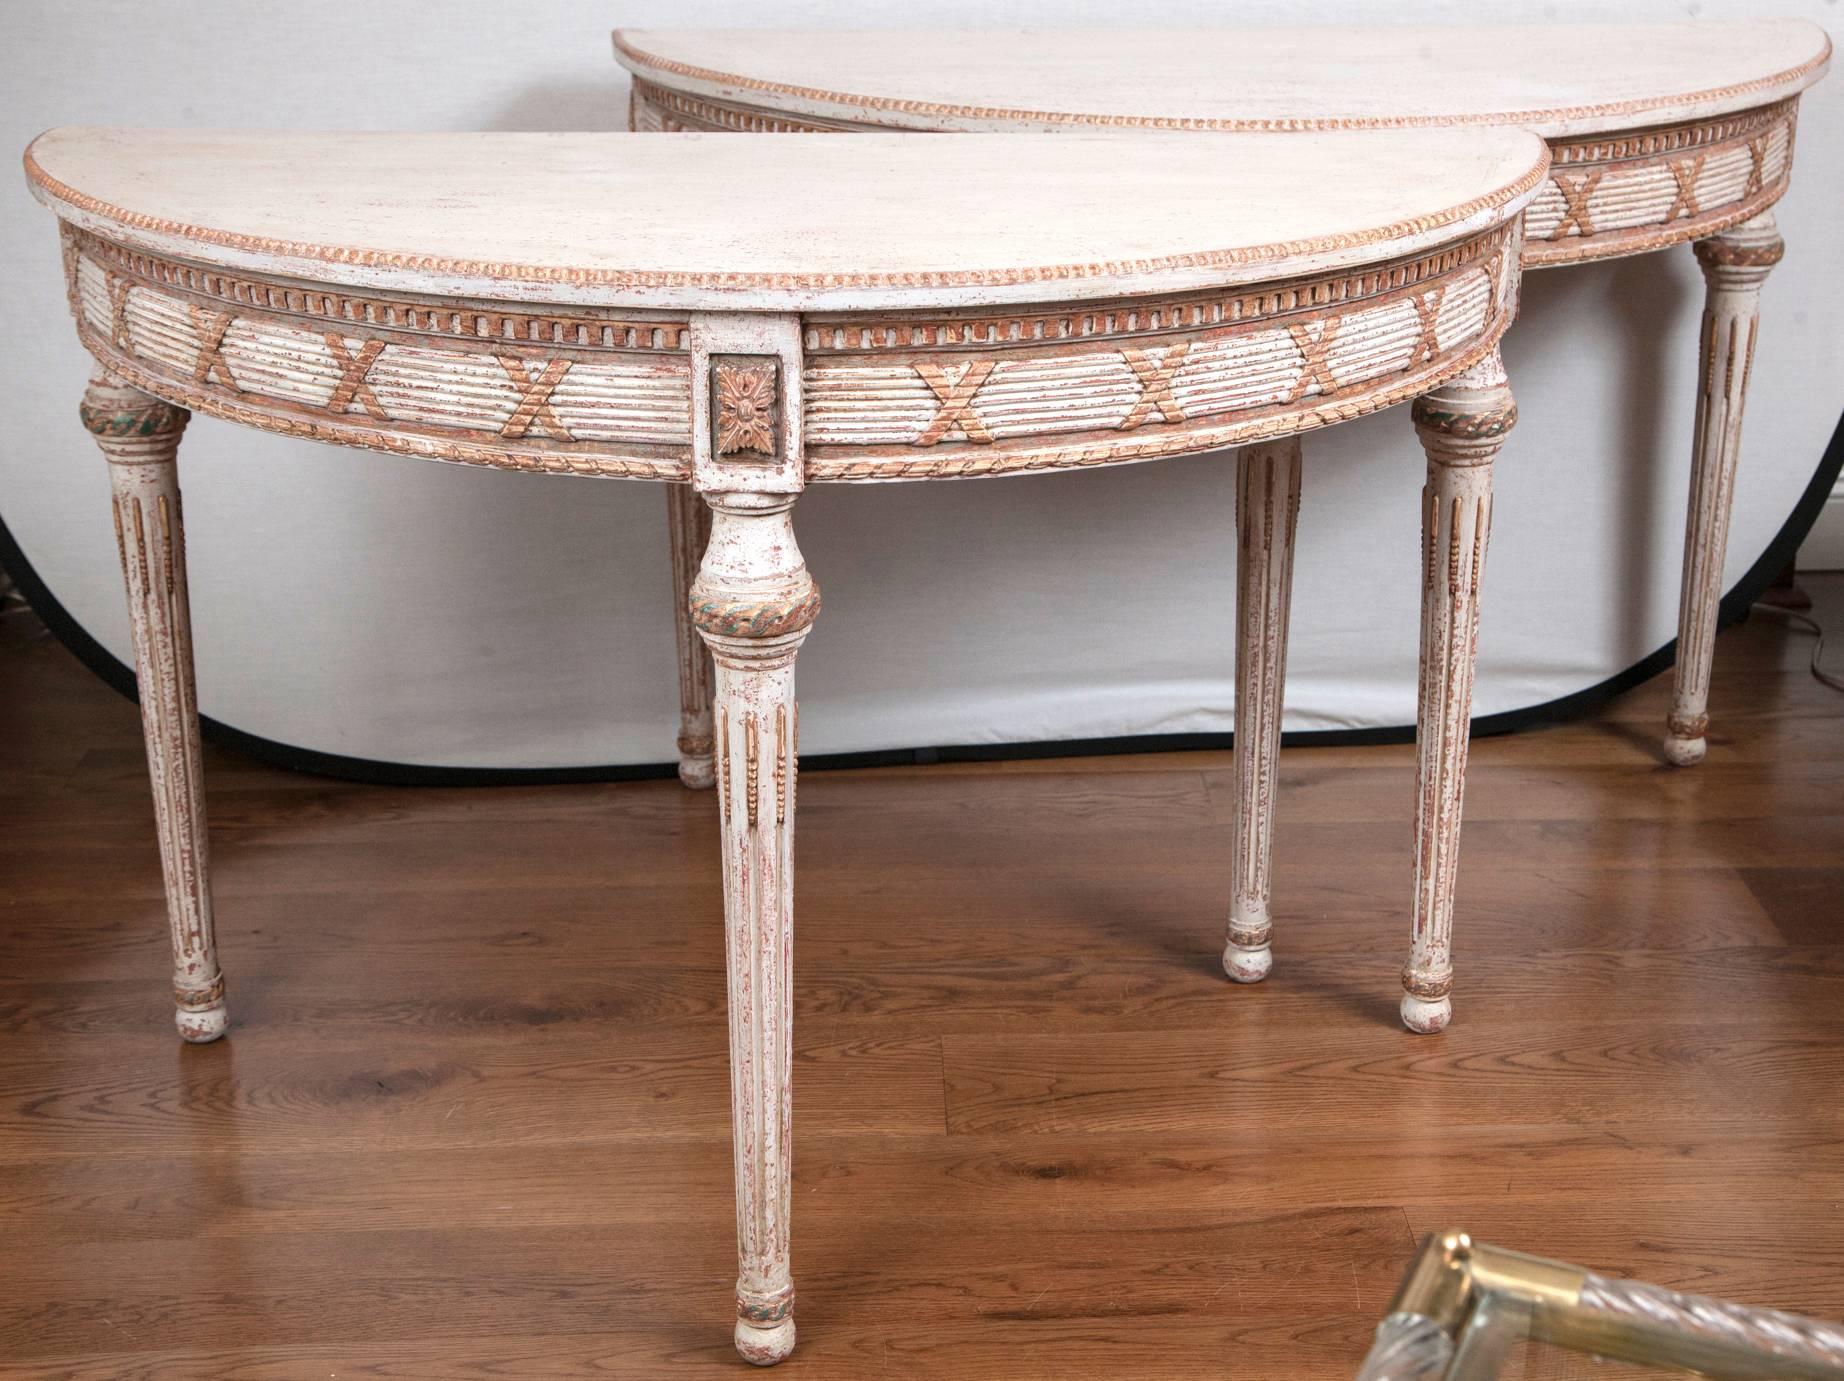 Generously sized pair of neoclassical demilune console tables on three straight and tapered legs adorned with gilded Louis XVI detailing, overall creme color with deep reddish undertones, orginiating from Scandinavia, circa 1890, paint